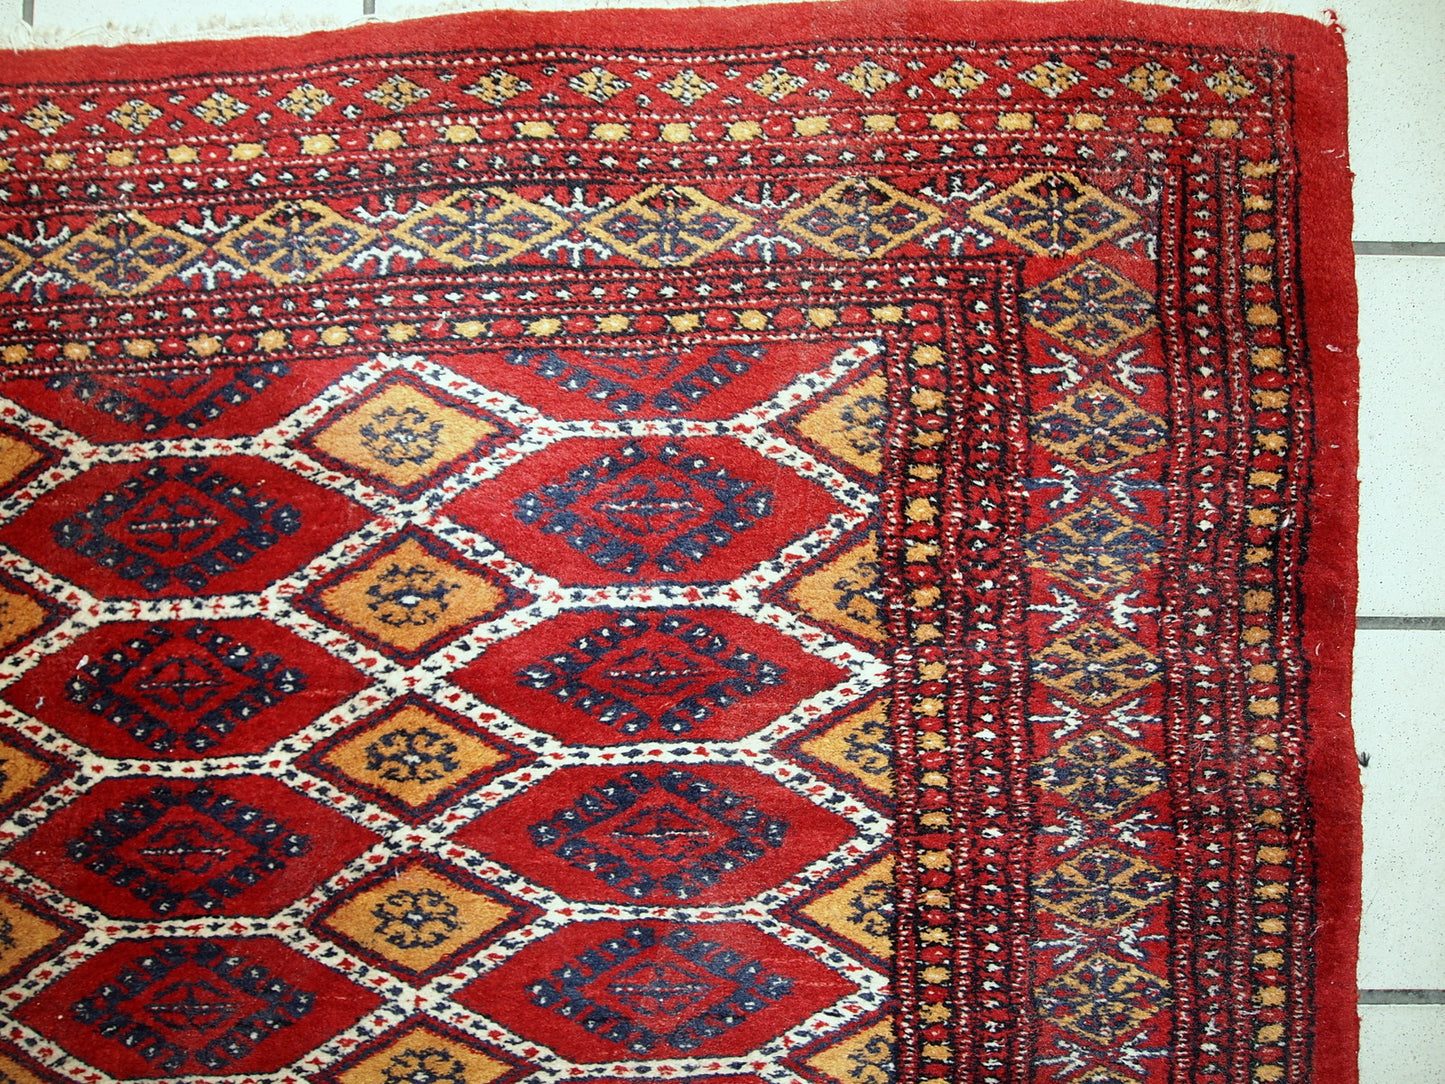 Vintage Uzbek Bukhara rug in red and yellow wool. The rug is from the end of 20th century in original good condition.